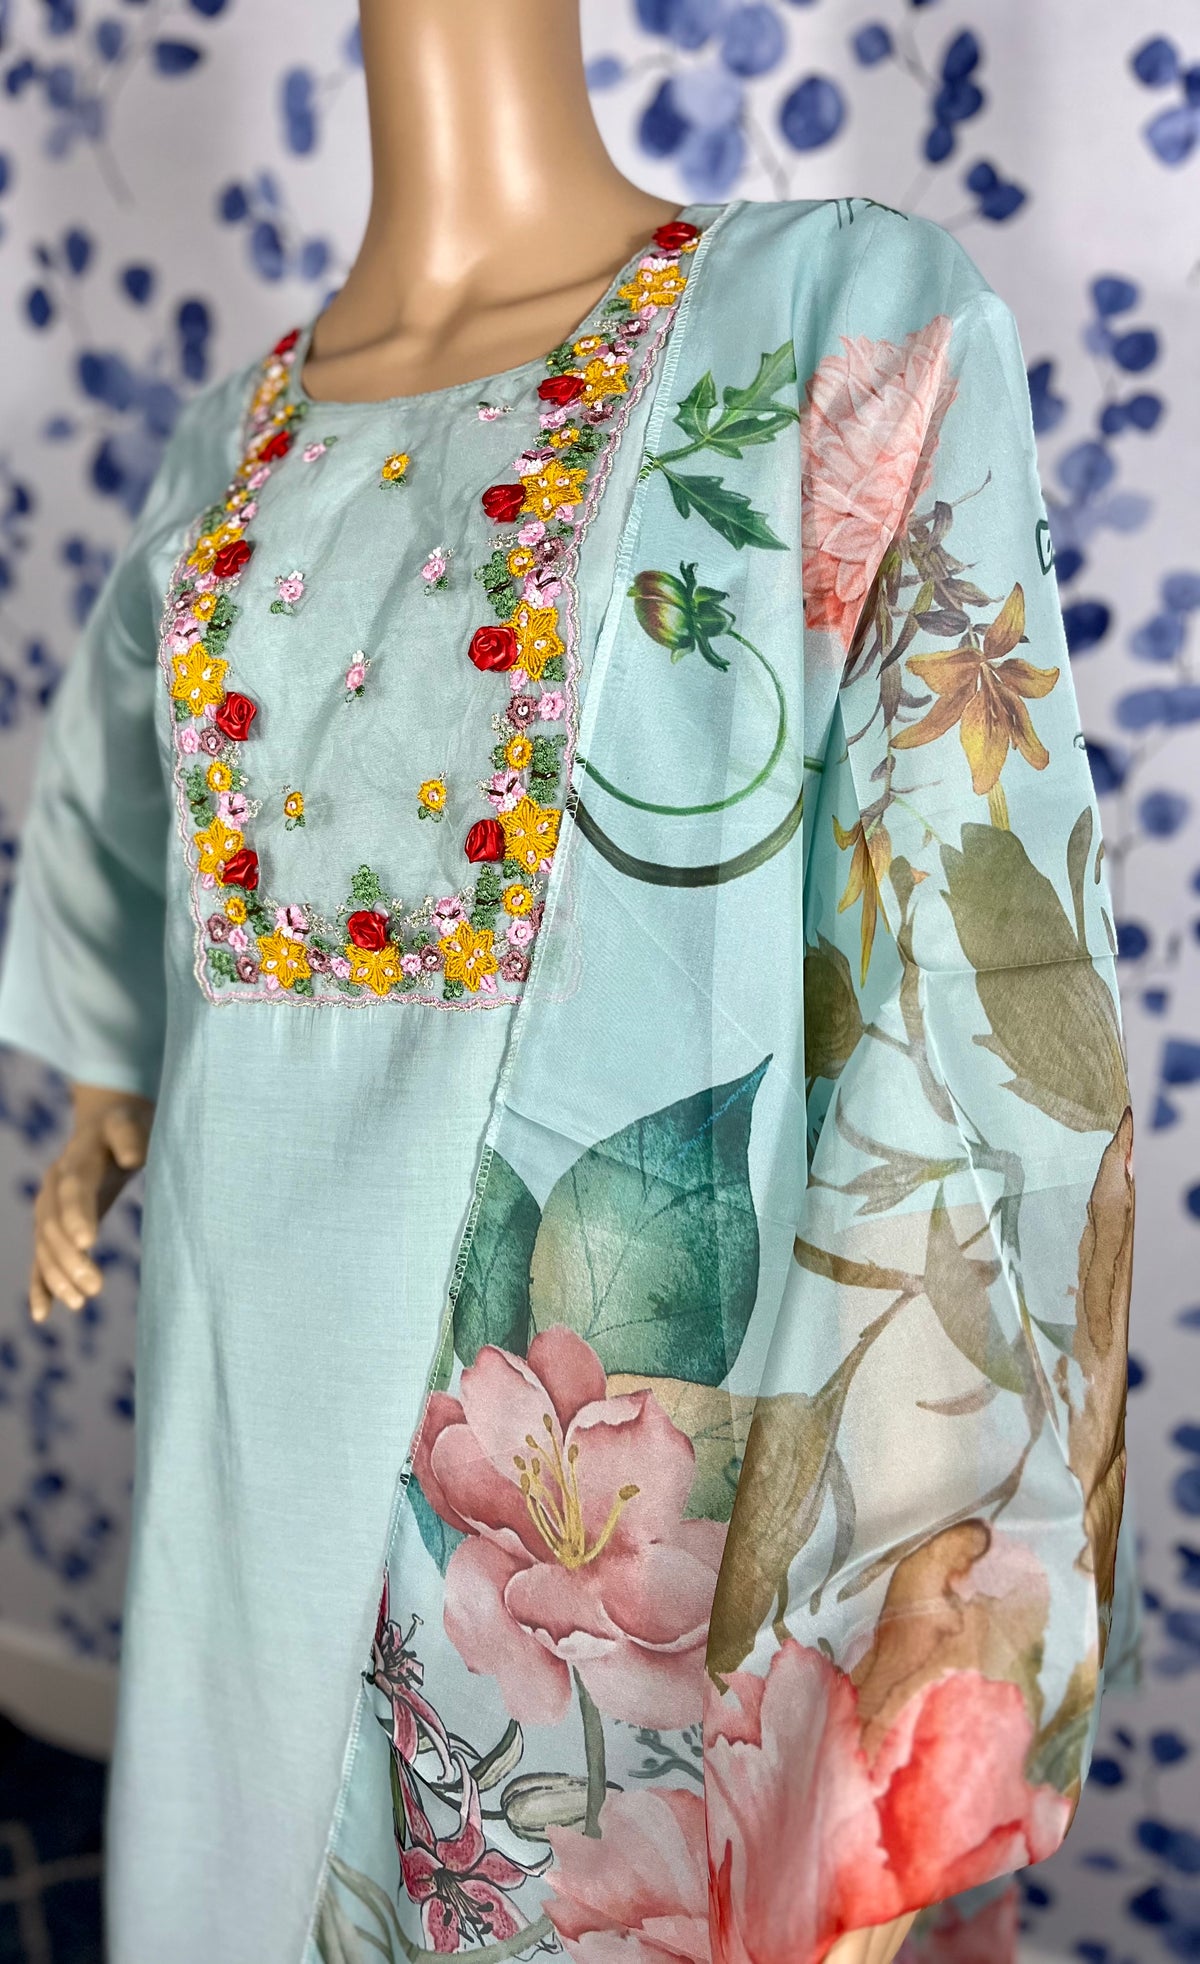 STK374-Roman Silk Kantha Handwork Neckline Embroidery and at Ghera with Orgenza digital Printed Dupatta with Roman Pants(Color: Light Pistachio Green)